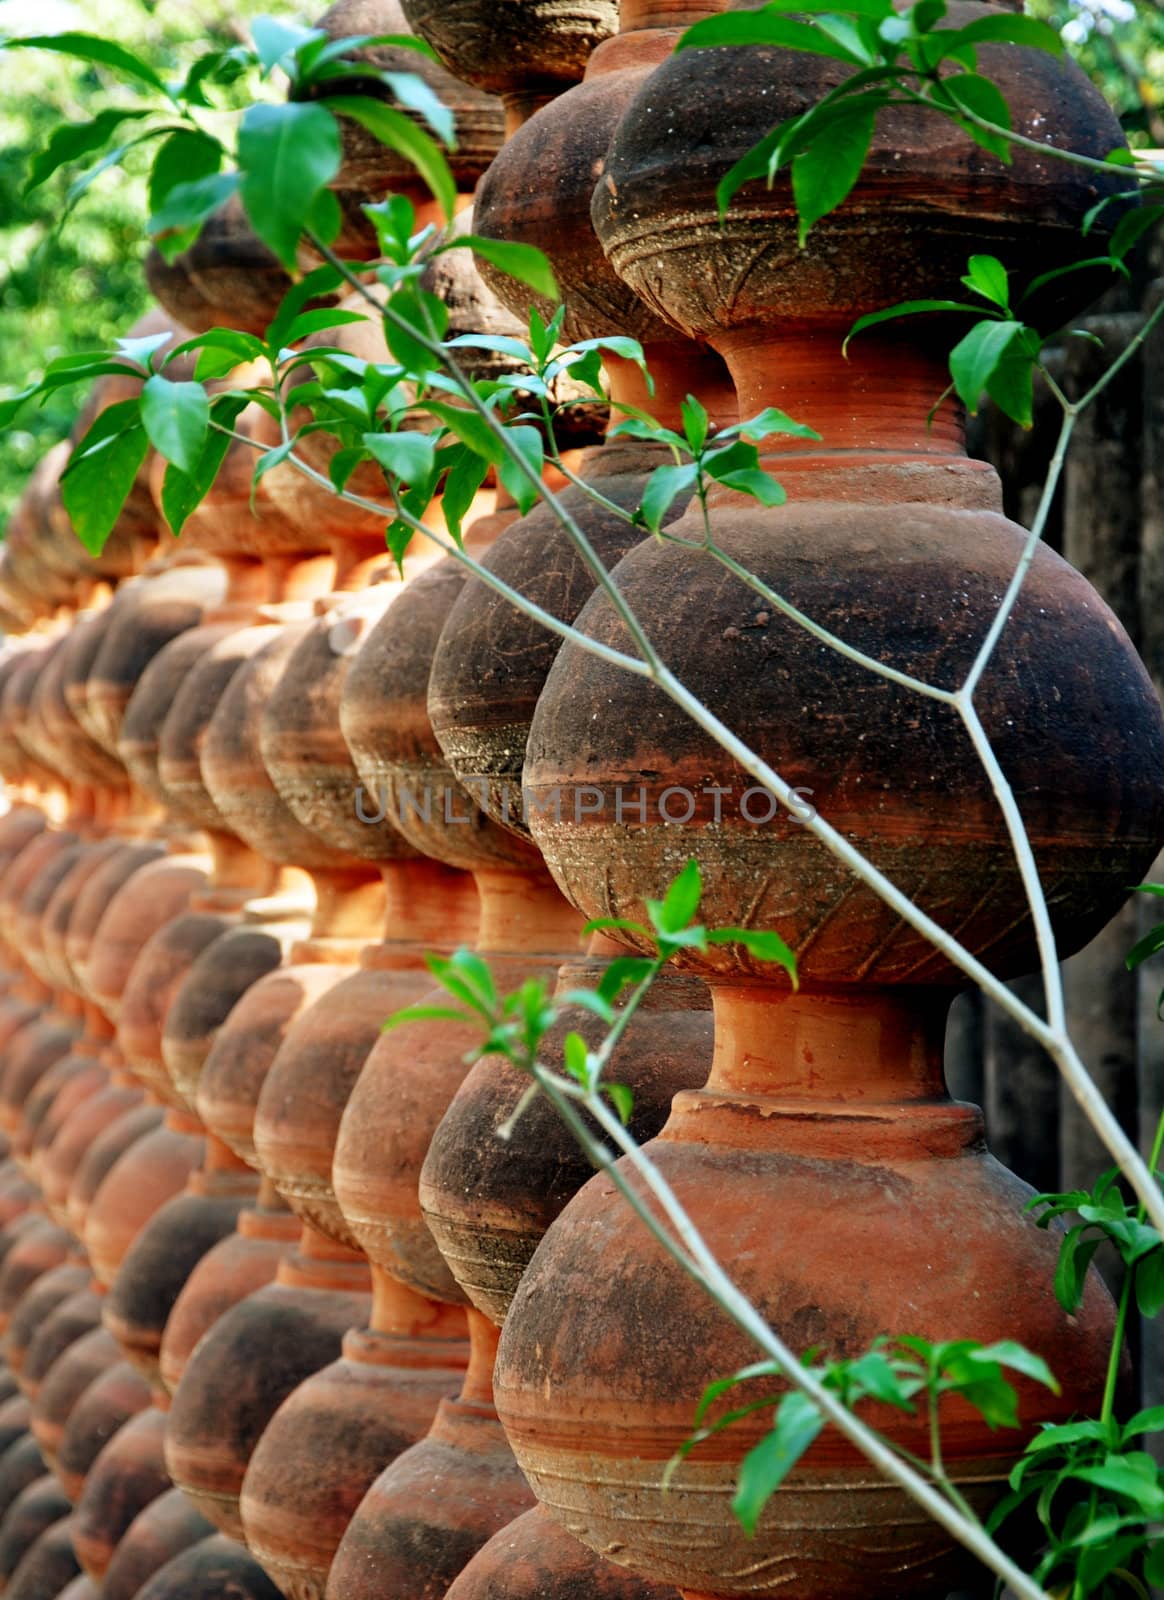 Beautifully Symmetrical Pots in India